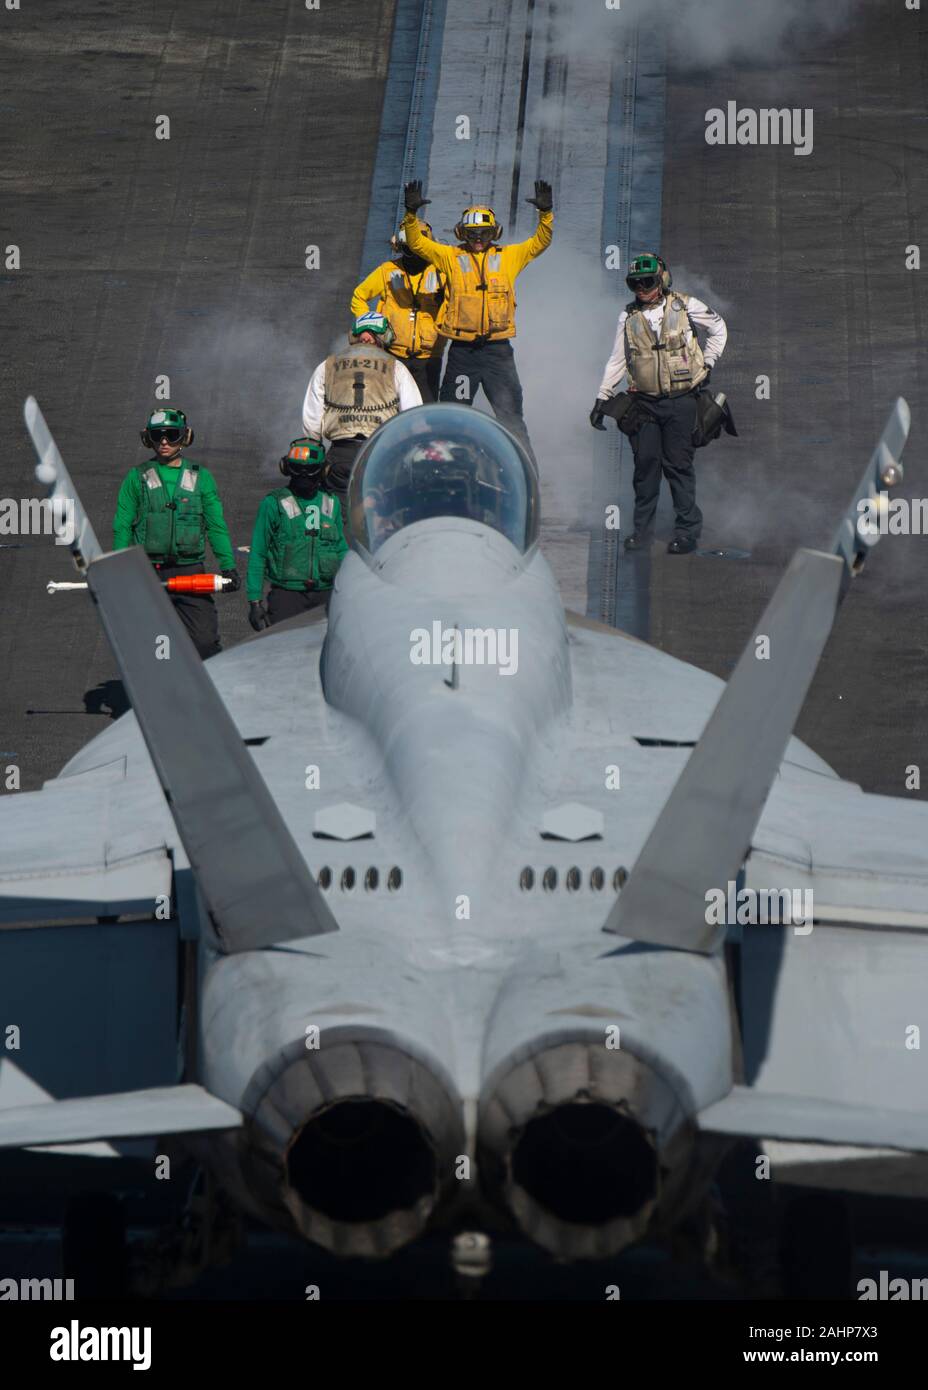 U.S. Navy Sailors align an F/A-18F Super Hornet fighter aircraft attached to the Fighting Checkmates of Strike Fighter Squadron 211 with a catapult on the flight deck  Nimitz-class aircraft carrier USS Harry S. Truman December 24, 2019 into the Arabian Sea. Stock Photo